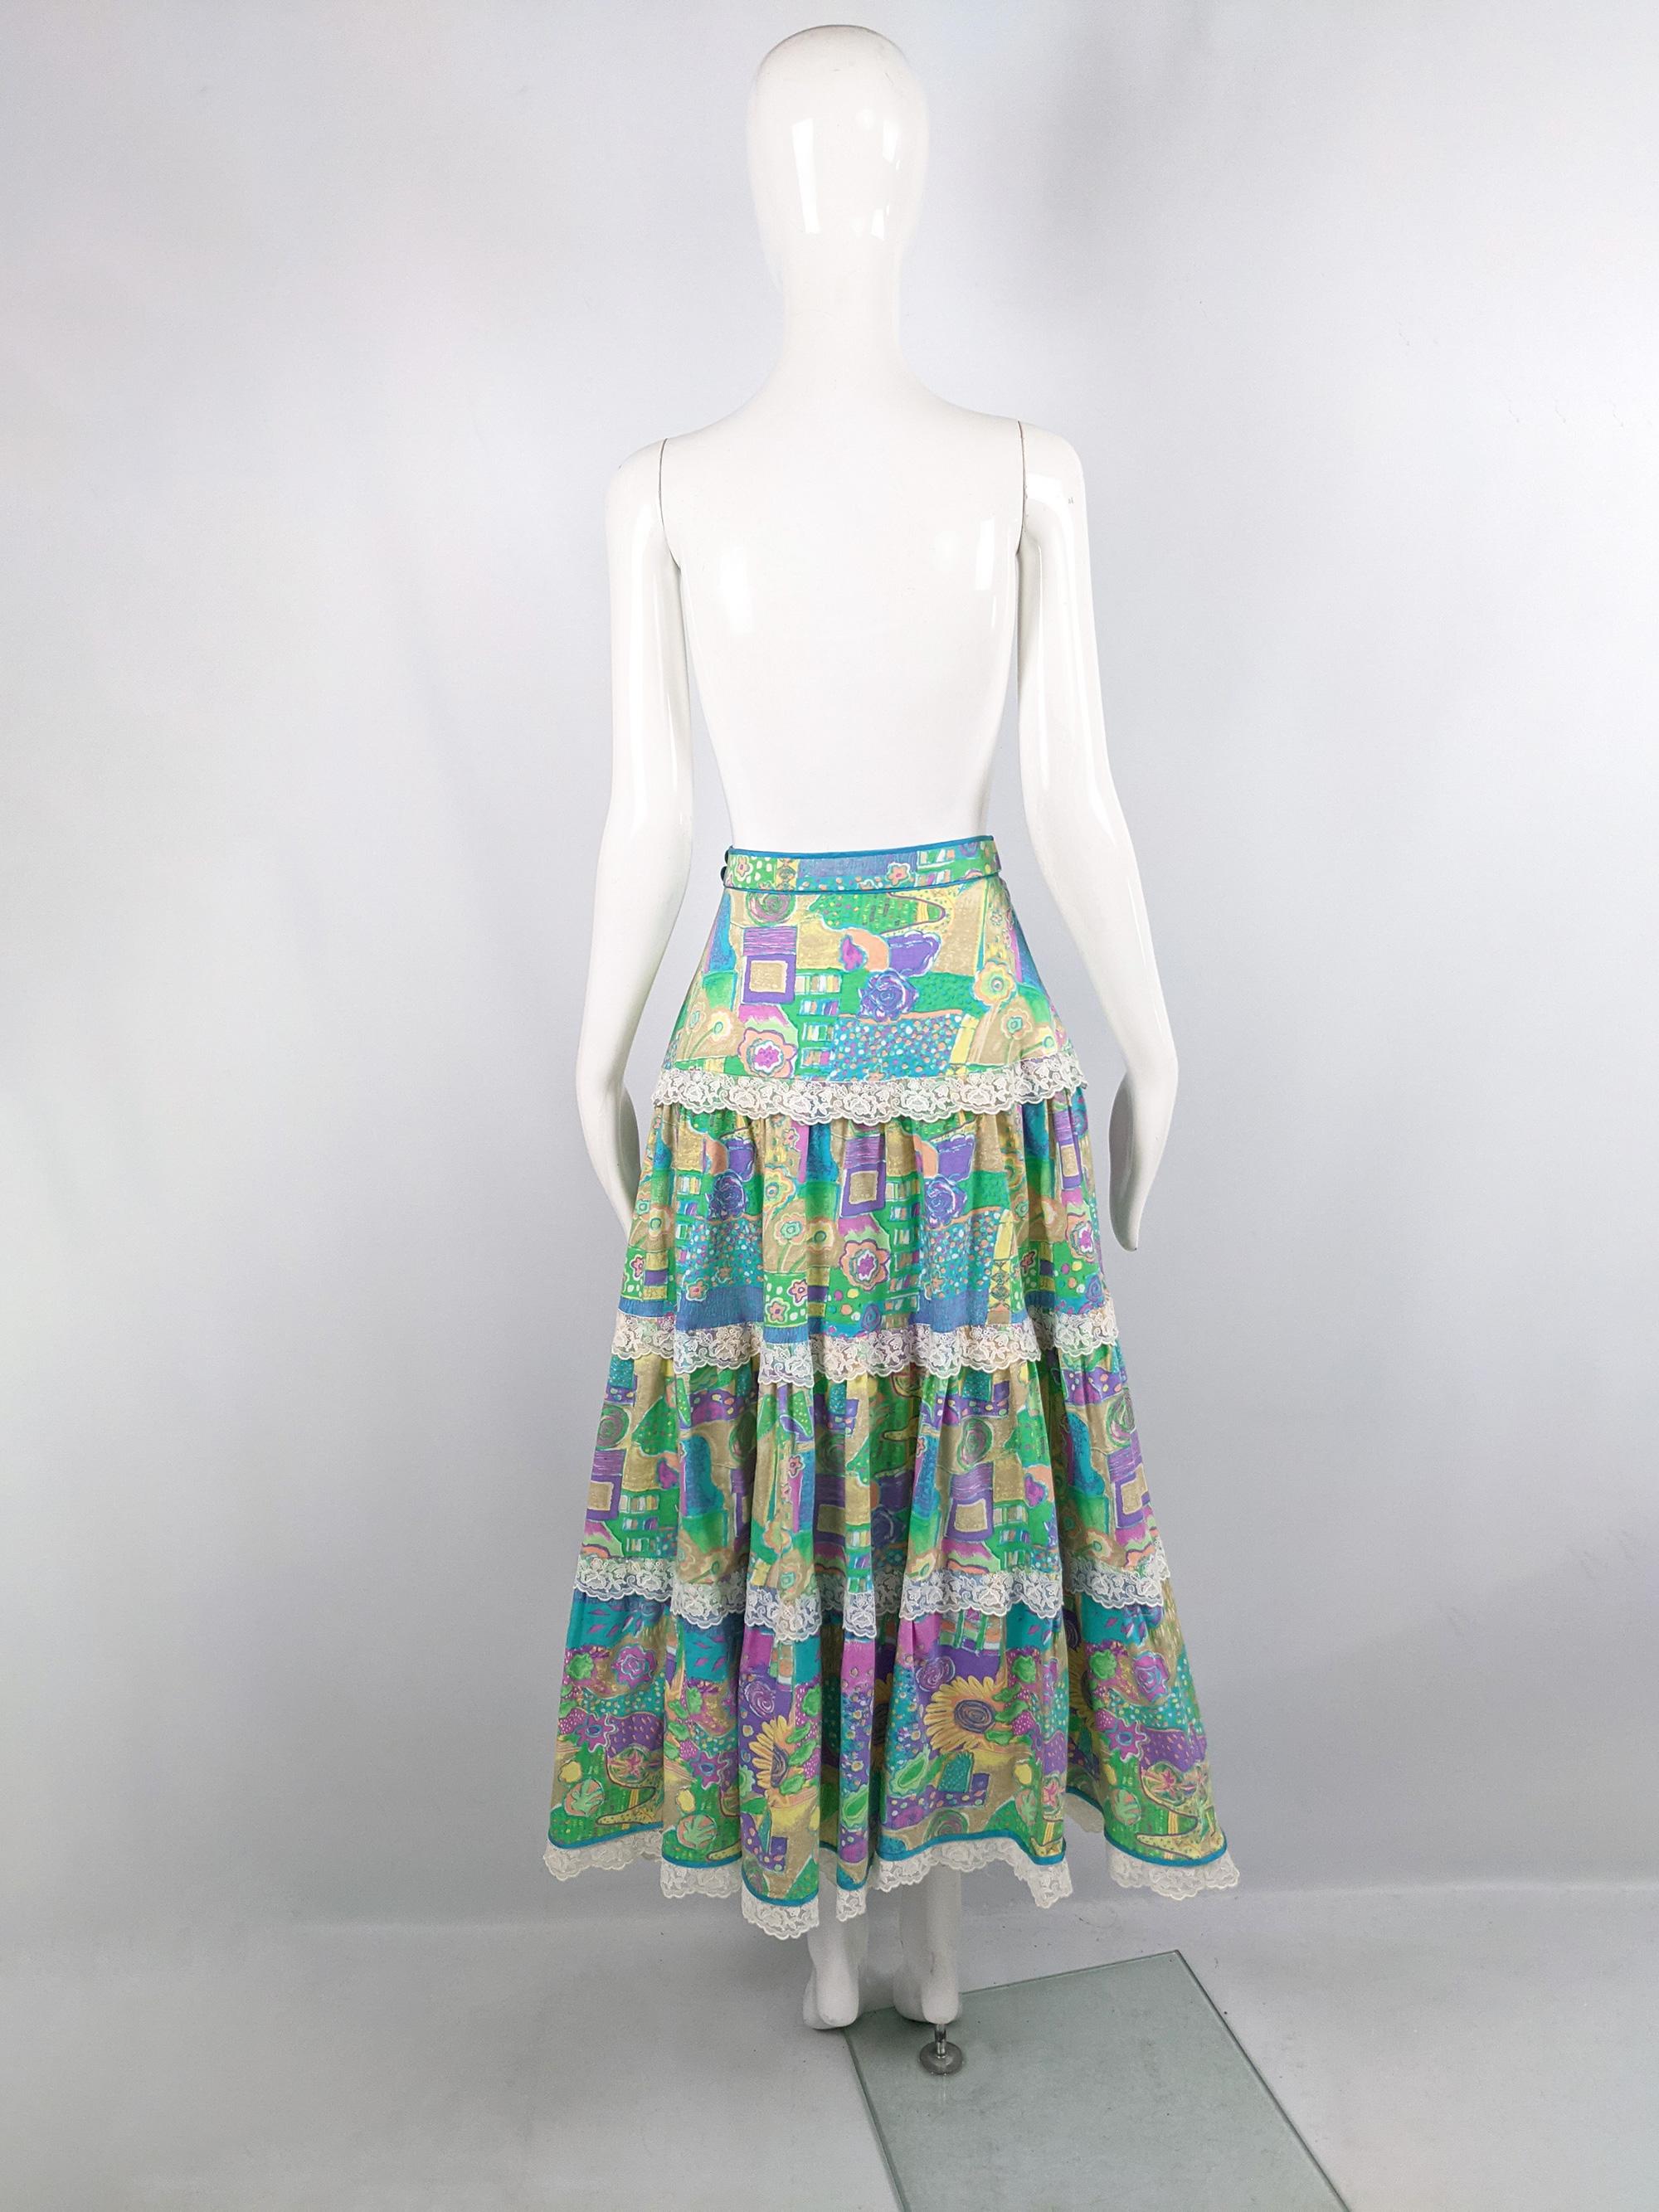 Annabelinda Vintage Tiered Expressionist Print Boho Peasant Maxi Skirt, 1970s In Excellent Condition For Sale In Doncaster, South Yorkshire